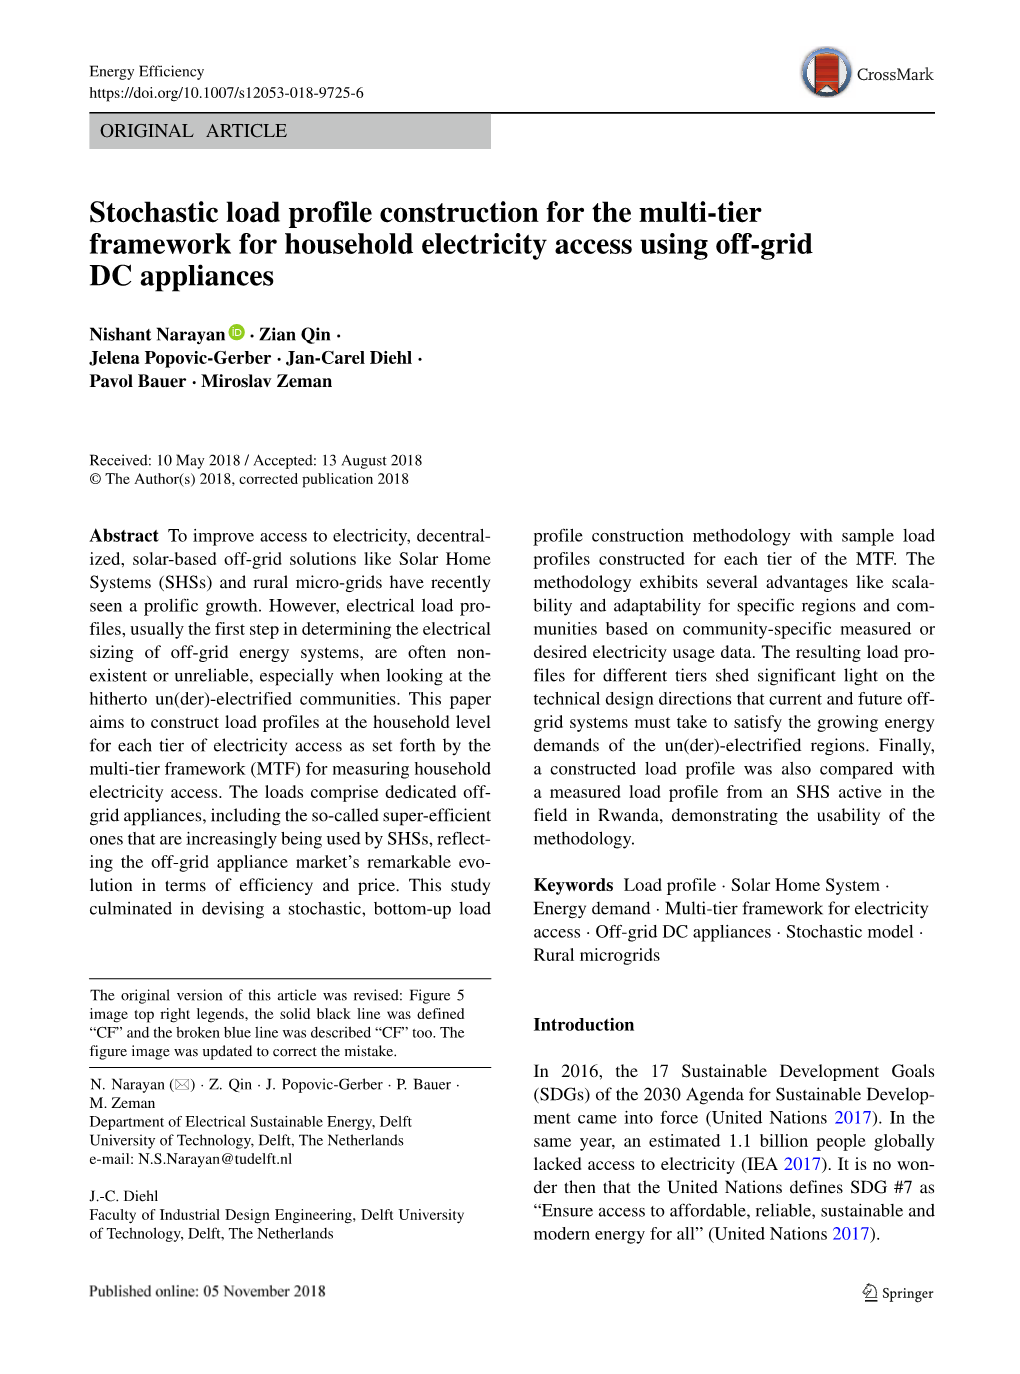 Stochastic Load Profile Construction for the Multi-Tier Framework for Household Electricity Access Using Off-Grid DC Appliances